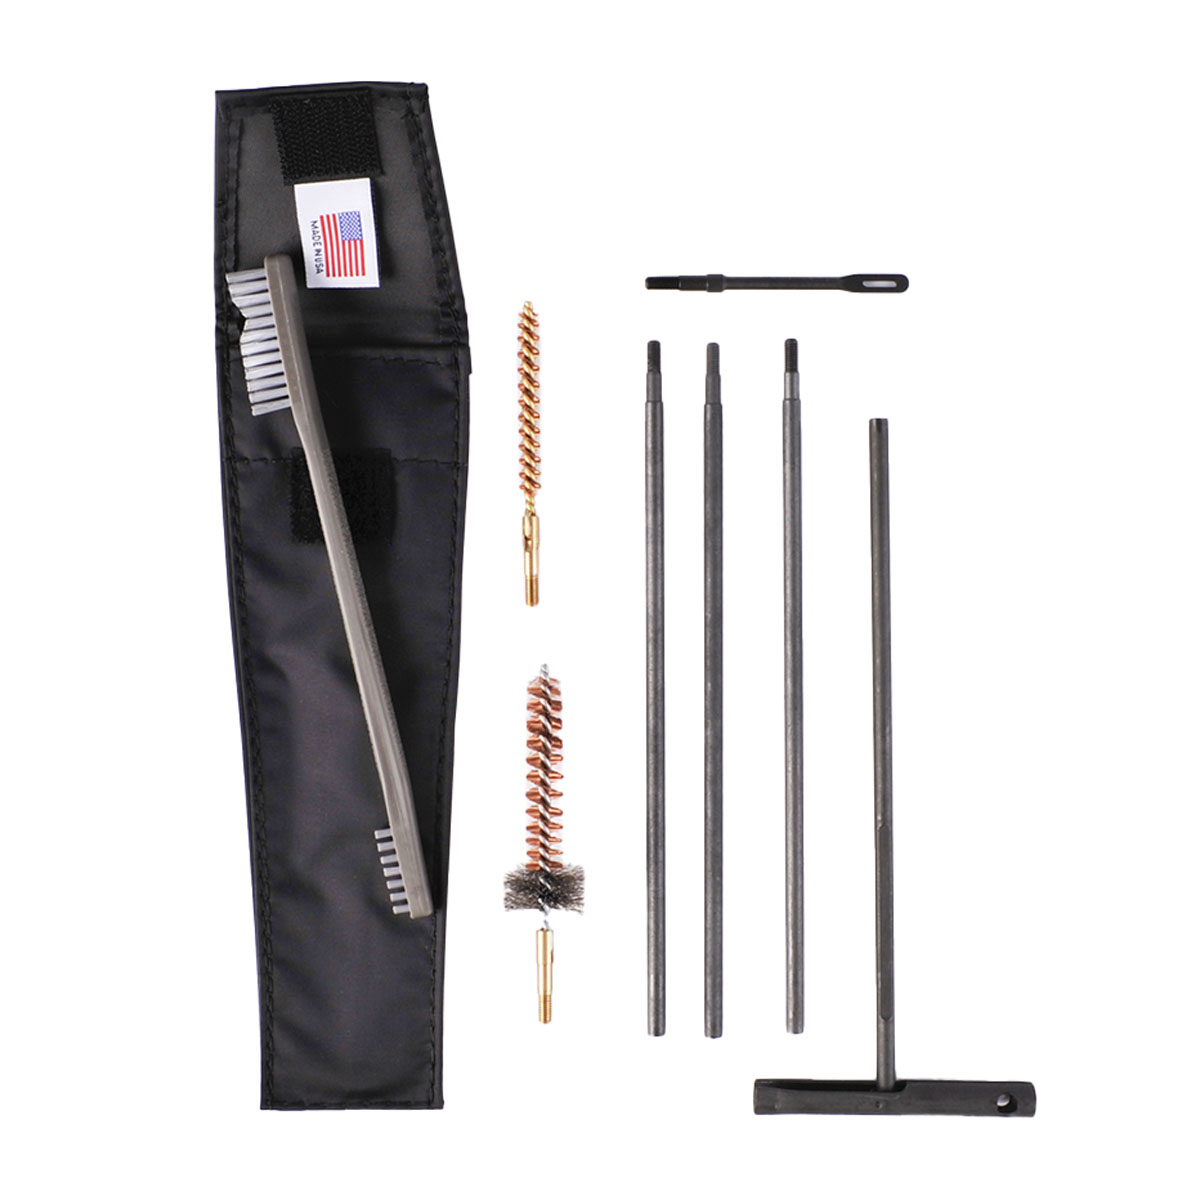 BROWNELLS - AR-15/M16 BUTTSTOCK CLEANING KIT